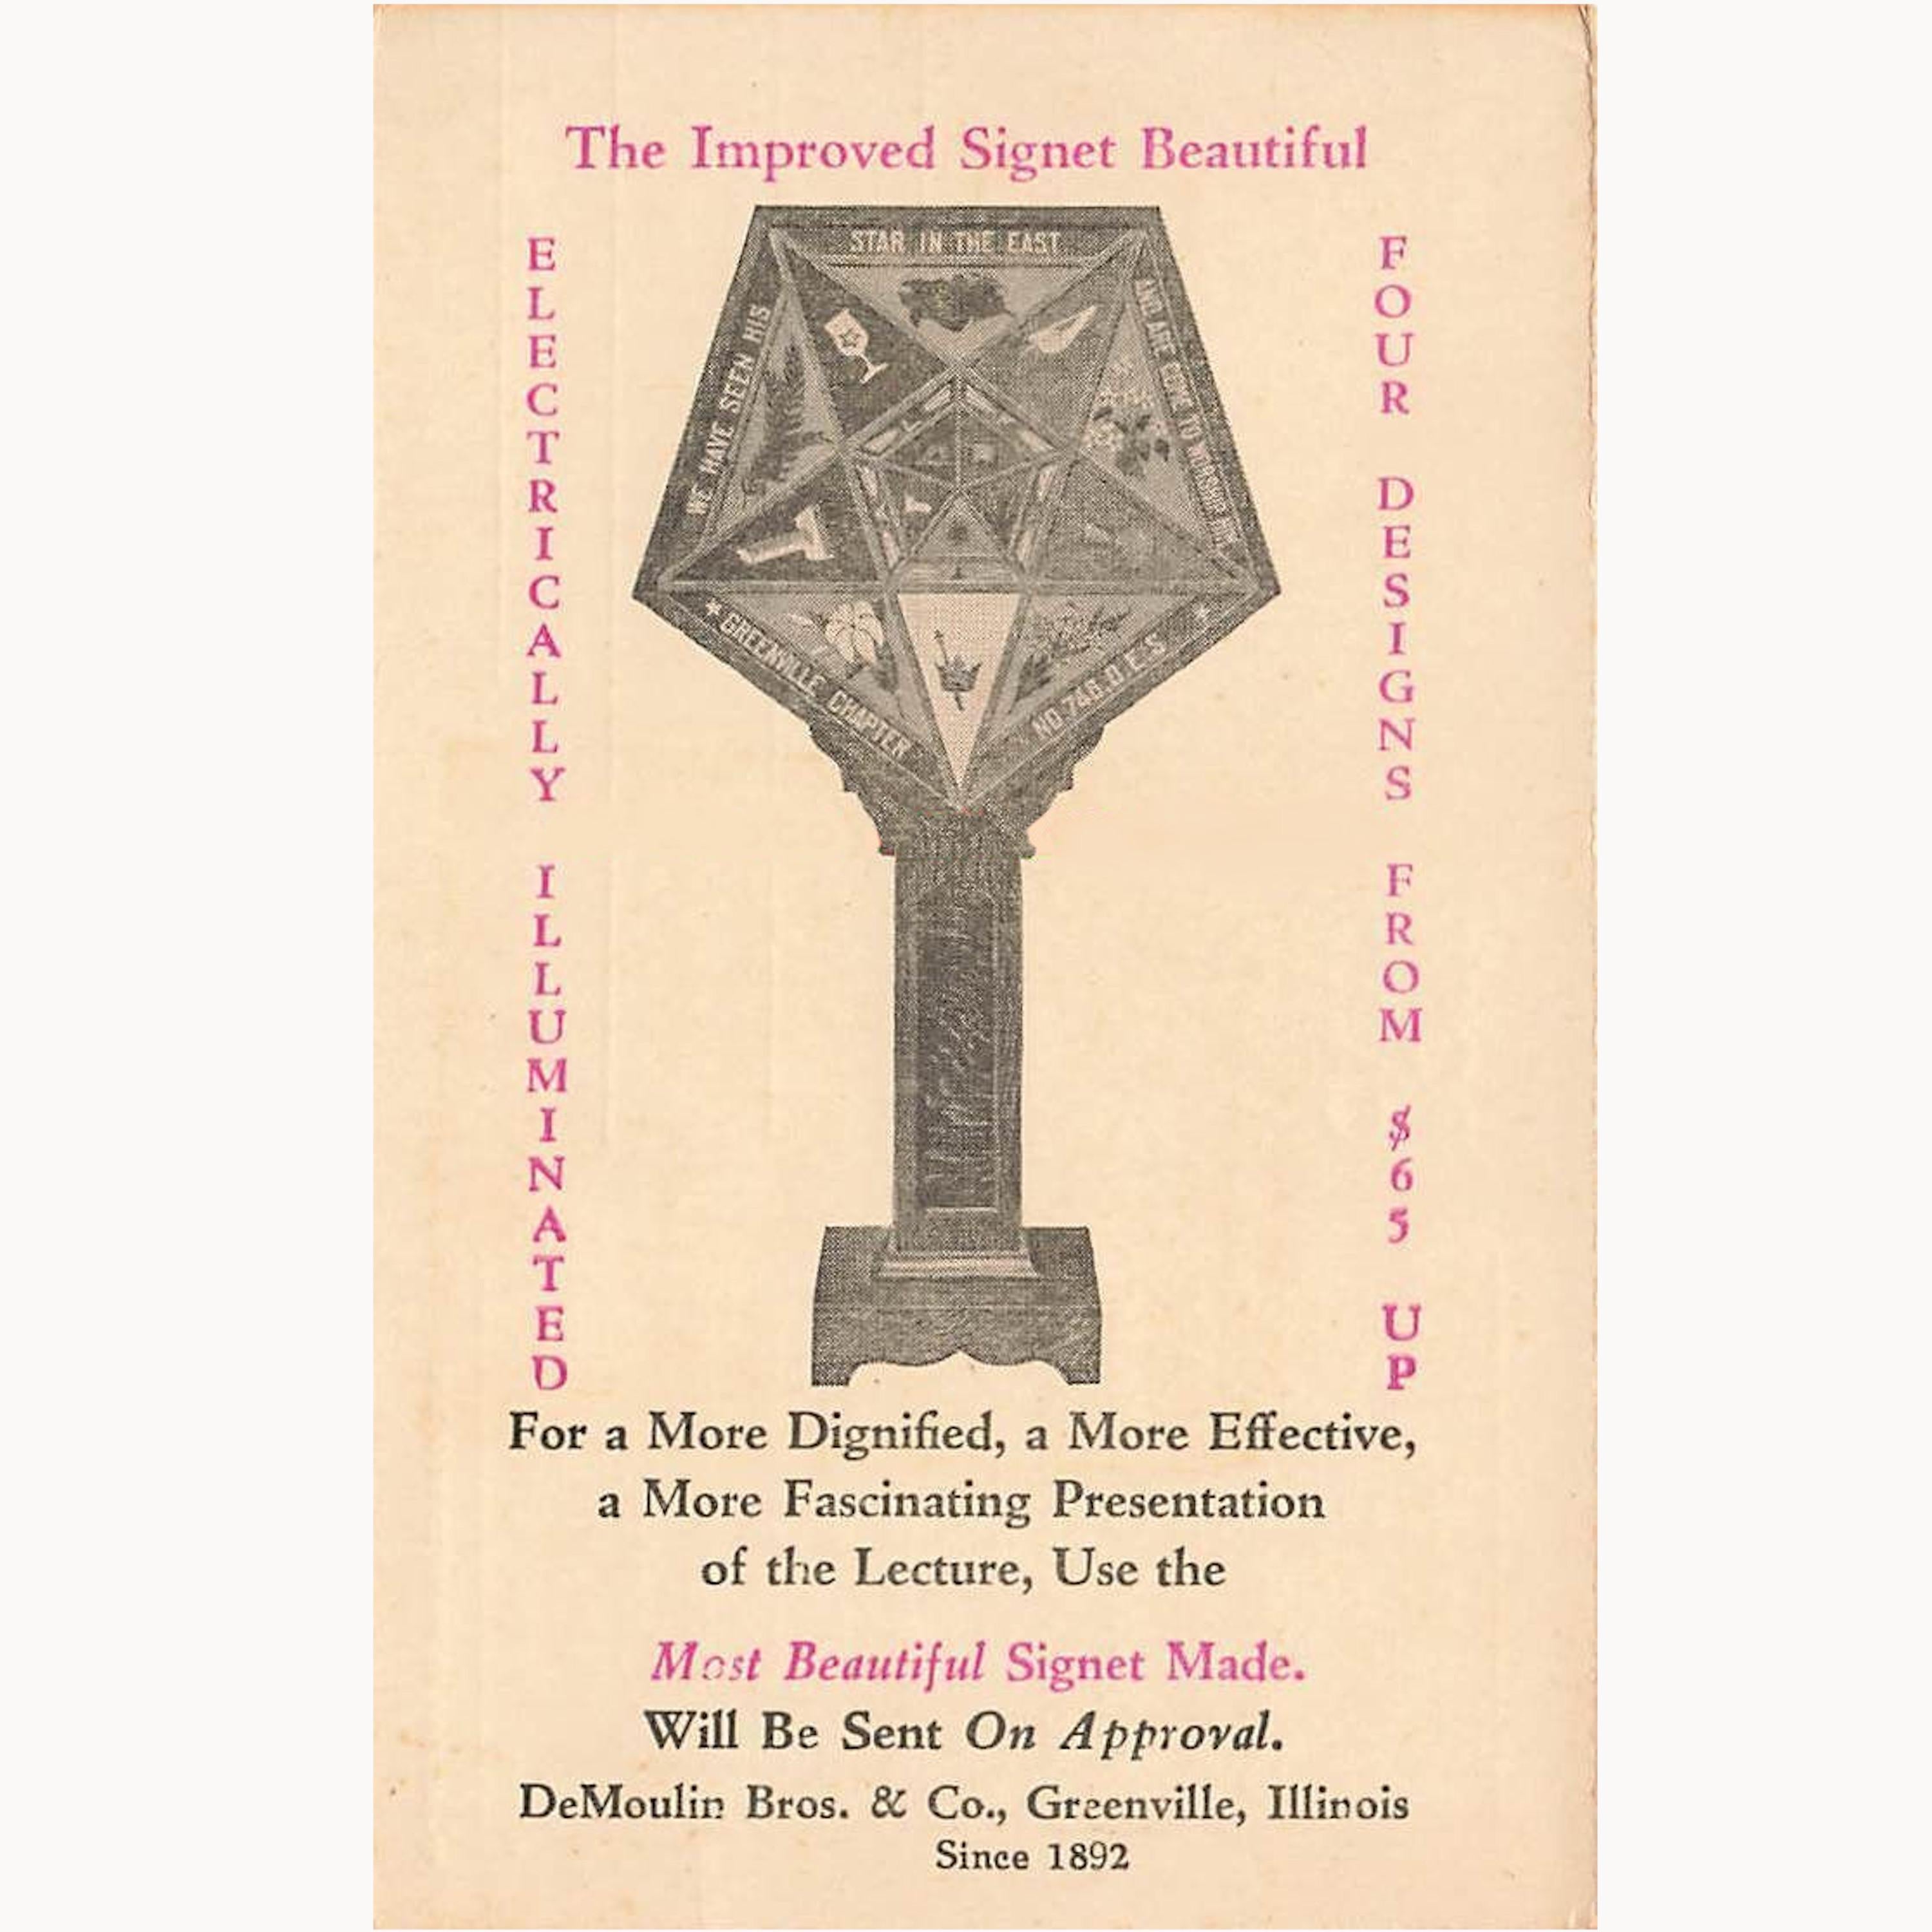 Rare Vintage 1930s Order of the Eastern Star Light-Up Masonic Lodge Signet Sign For Sale 5